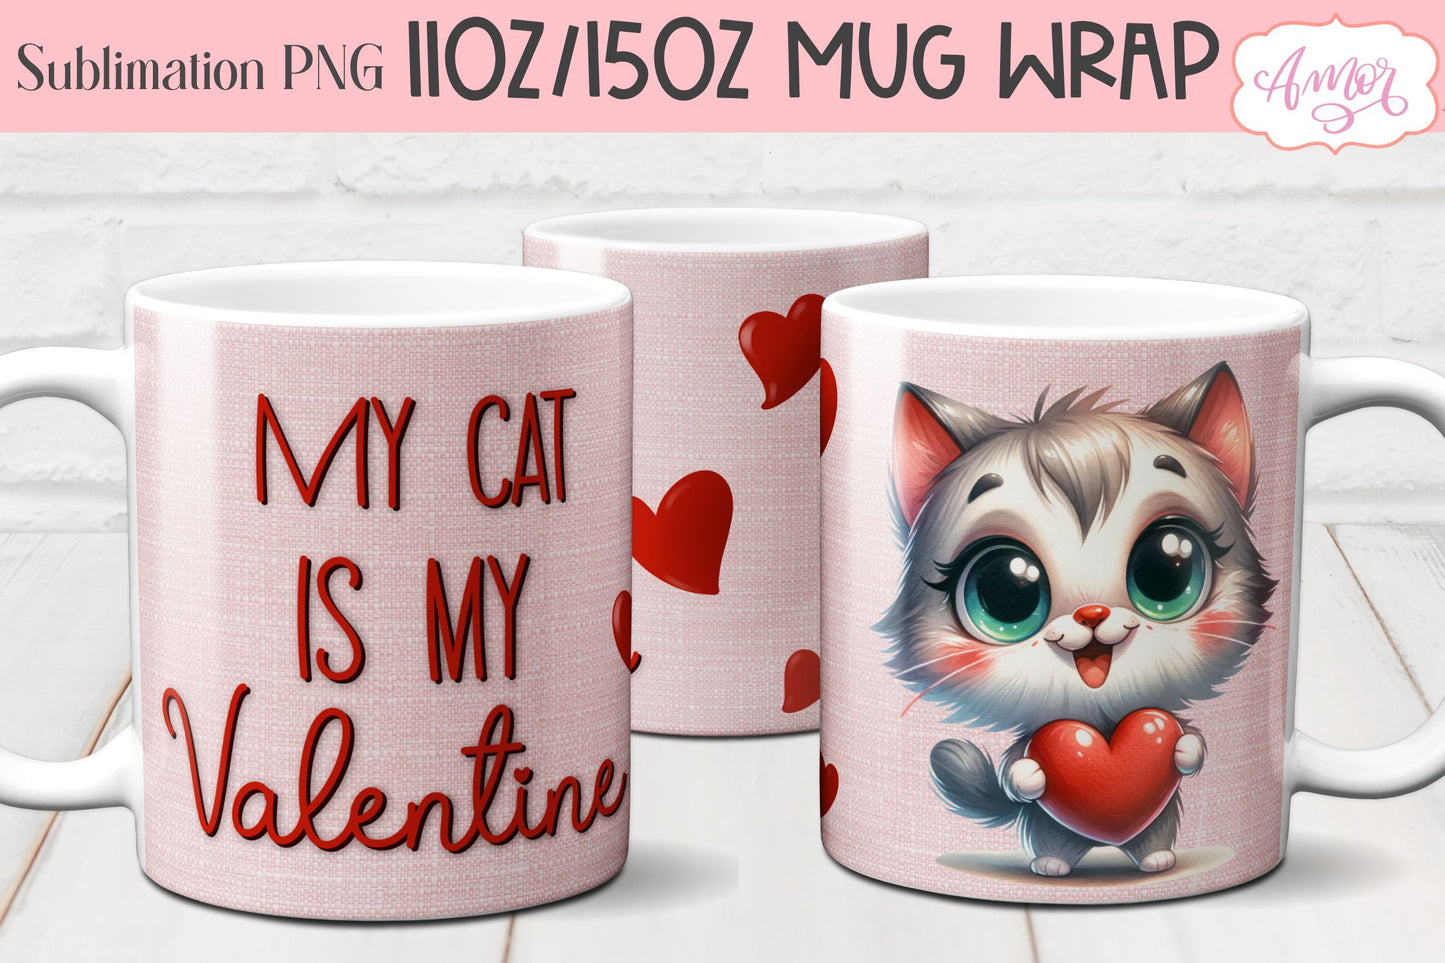 My cat is my valentine mug Wrap PNG for Sublimation